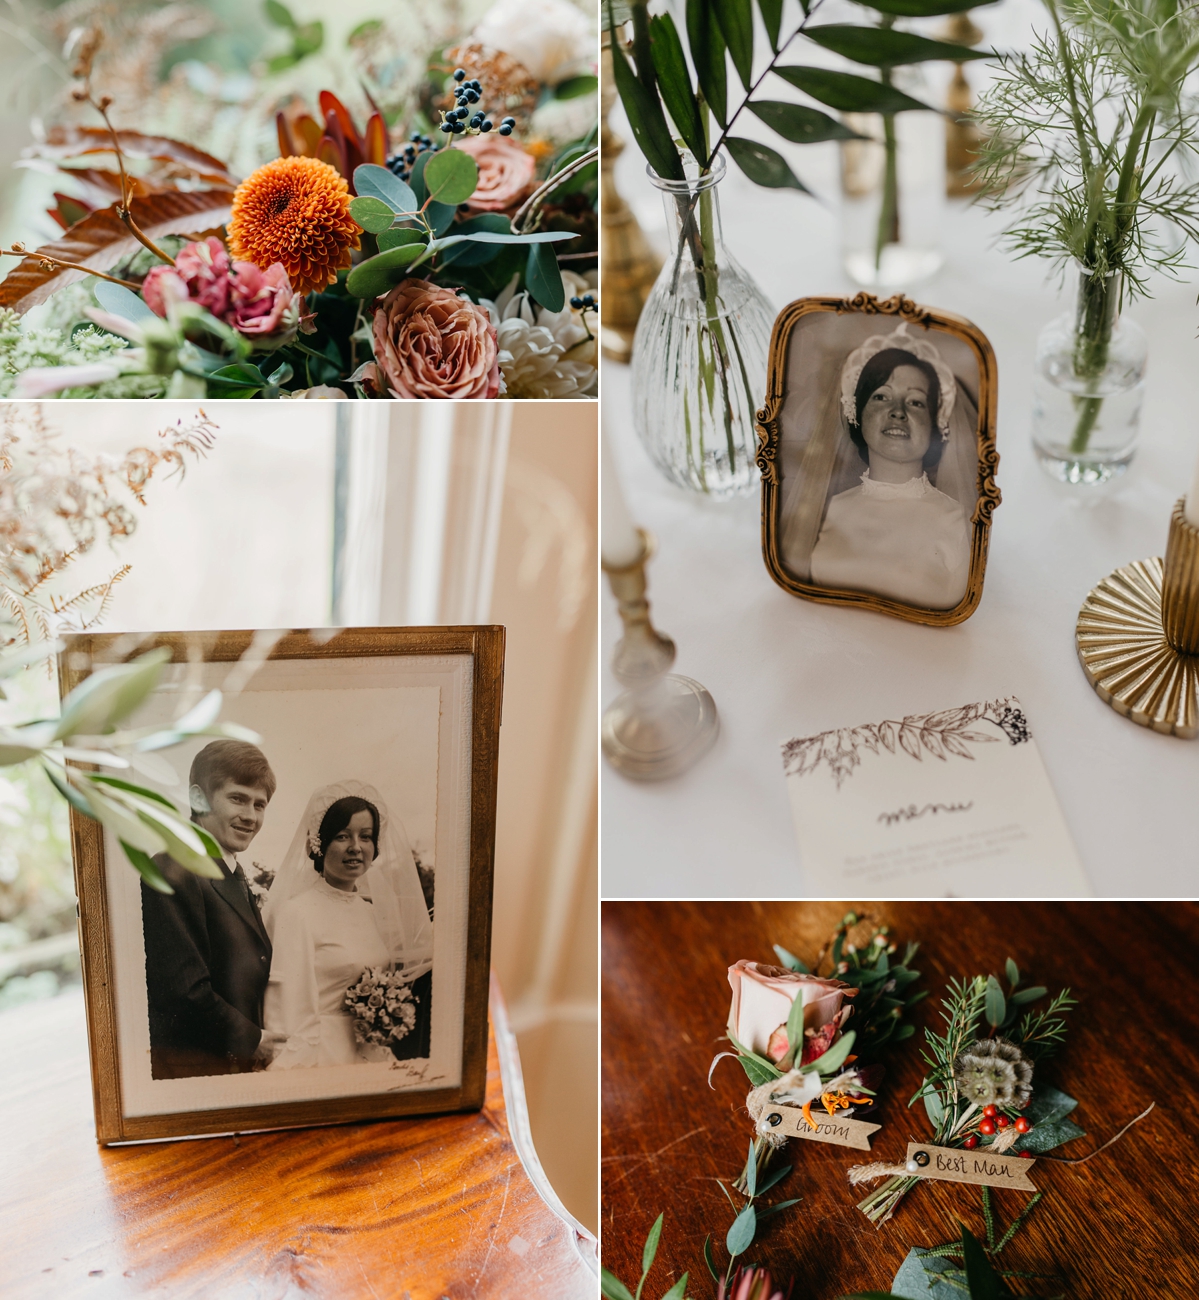 3 Halfpenny London bridal separates for a sweet family wedding